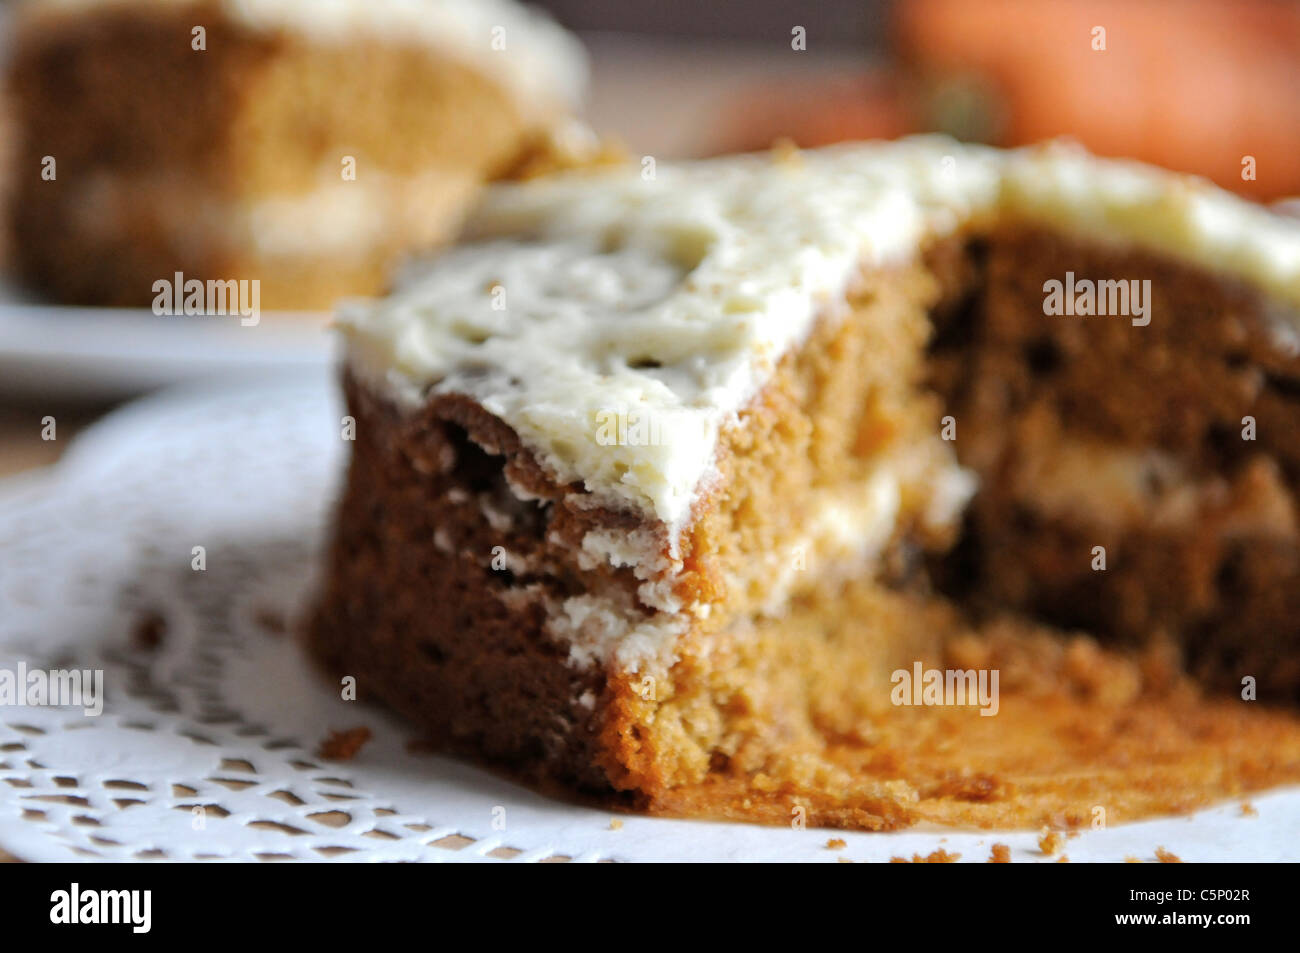 Carrot cake on a white plate Stock Photo